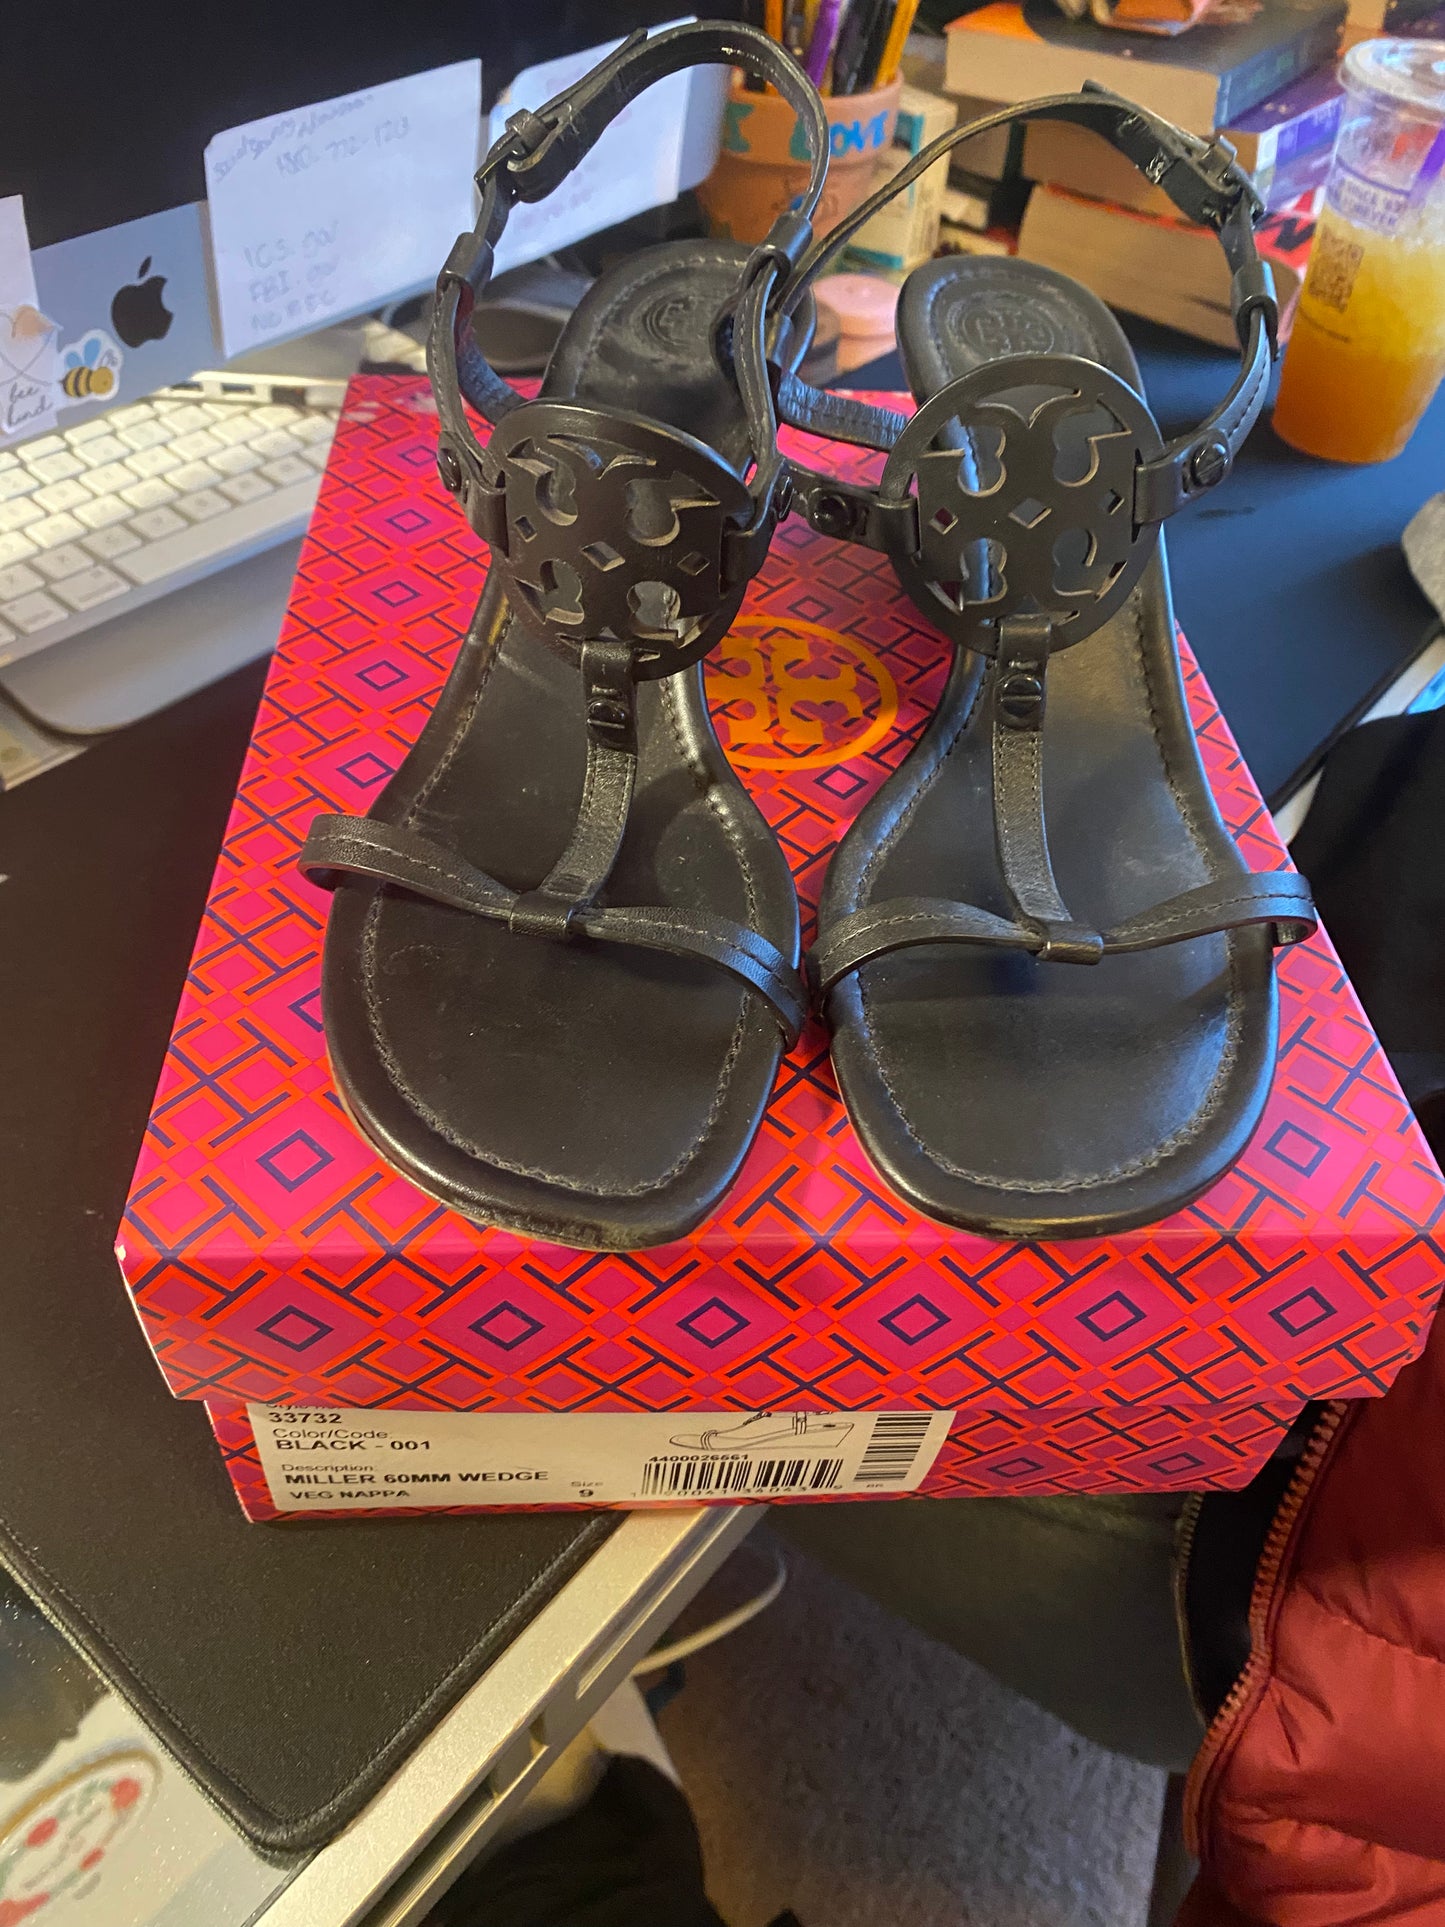 New Shoes: Tory Burch Black Wedges